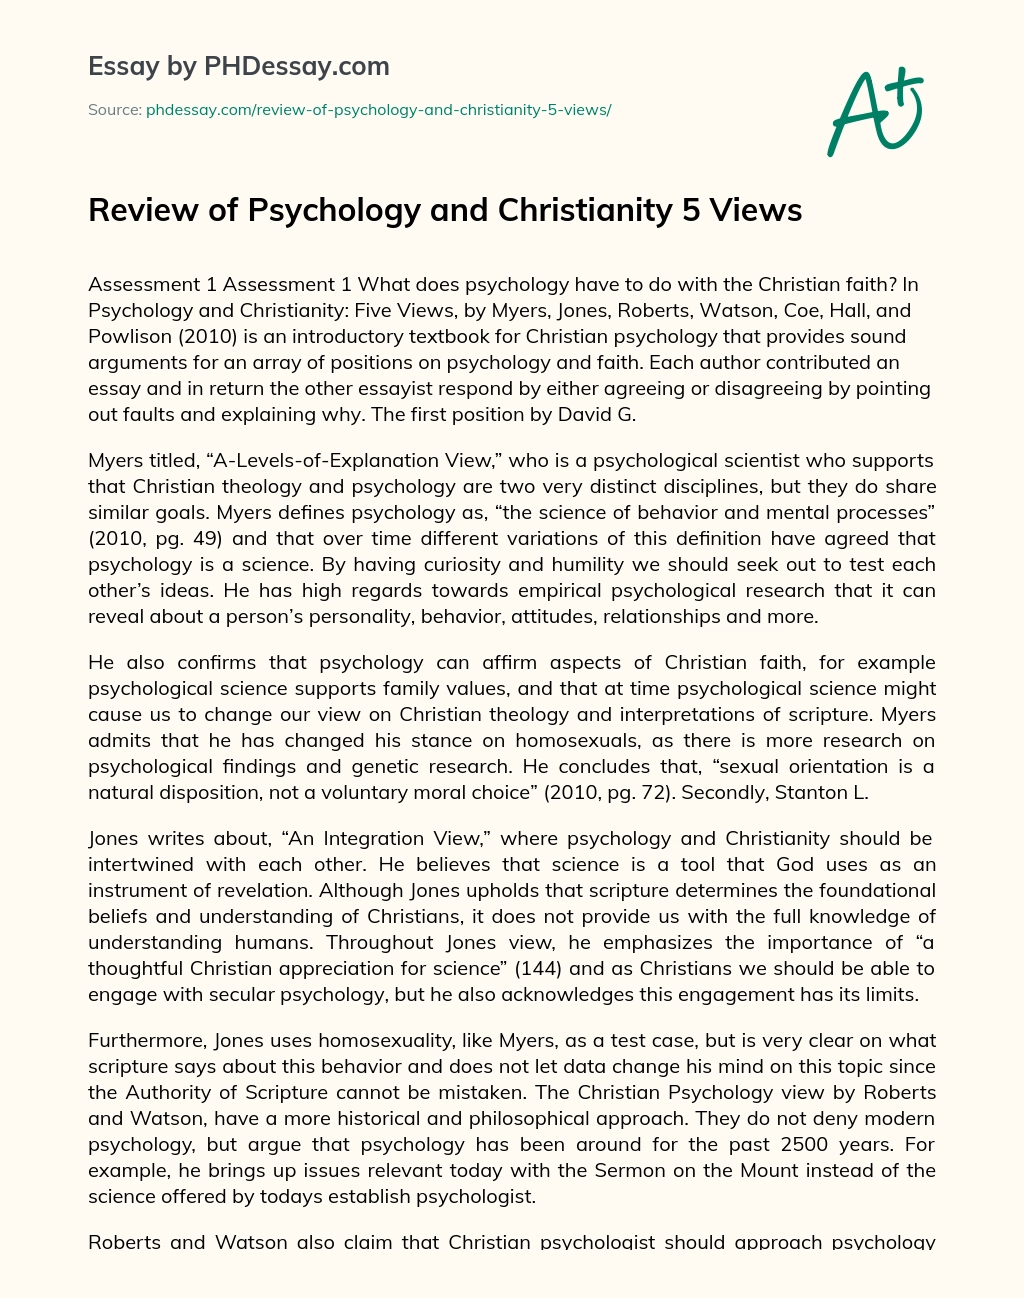 Review of Psychology and Christianity 5 Views essay